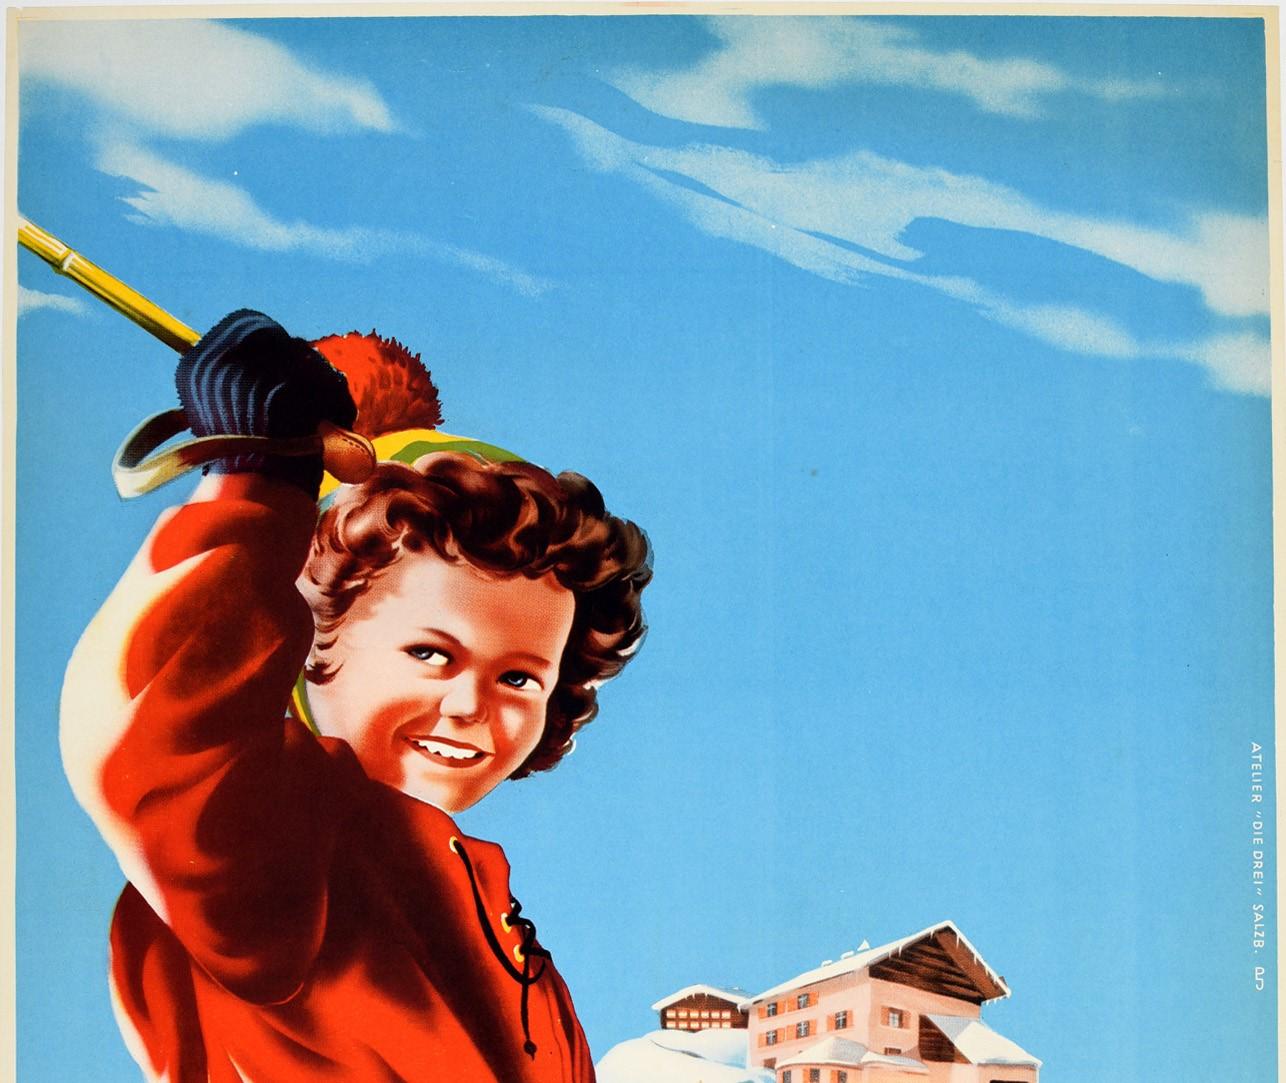 Original vintage ski travel poster for Zell Am See Austria featuring a young girl smiling and raising a ski pole over her head in front of people skiing down the piste at speed in the background and skiers in a cabin cable car riding up to the